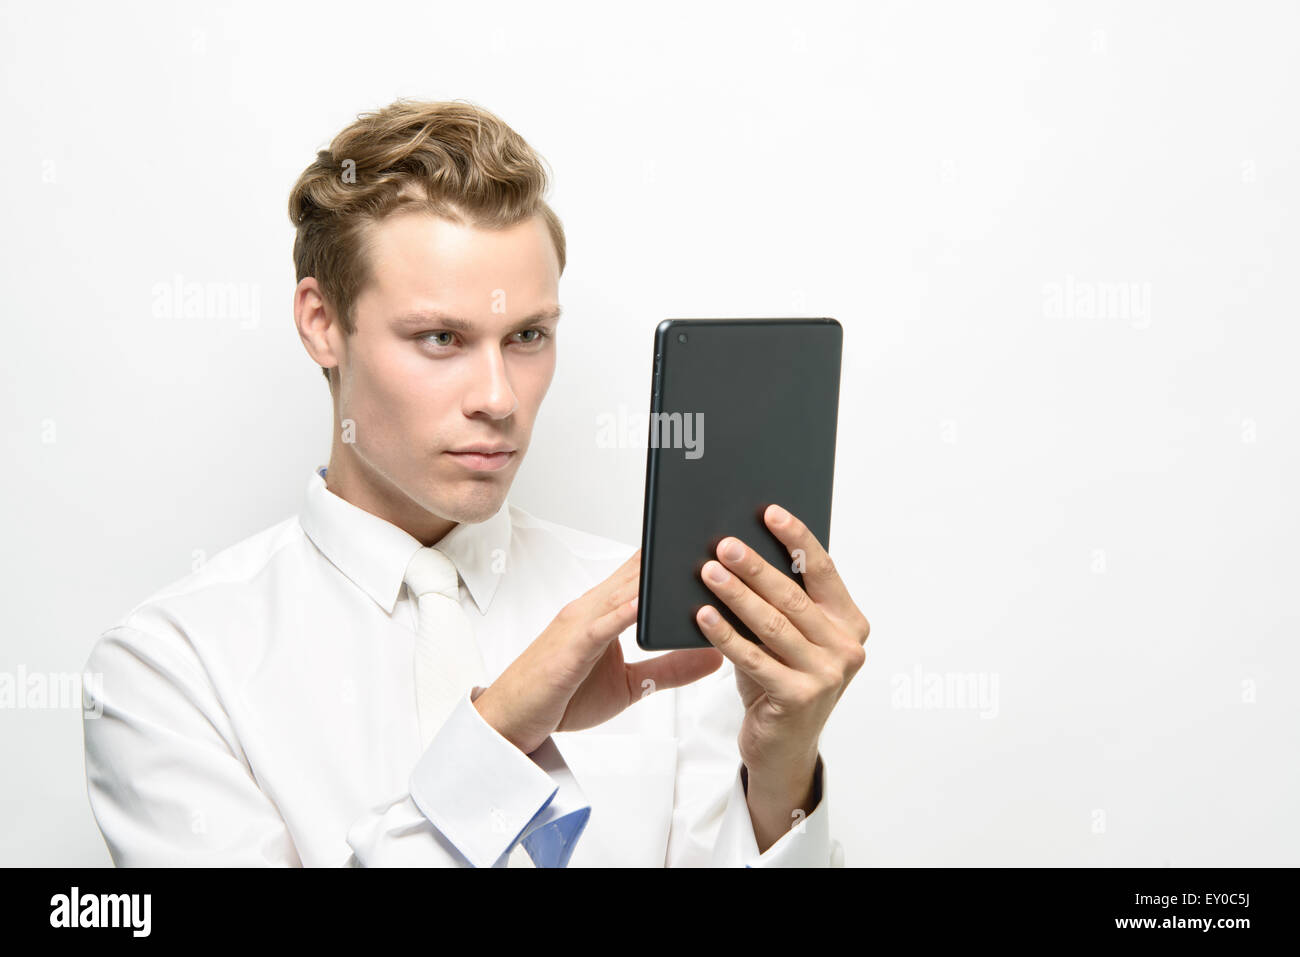 A handsome young man using an ipad/tablet. He wears an all white outfit, a clean futuristic concept. Stock Photo